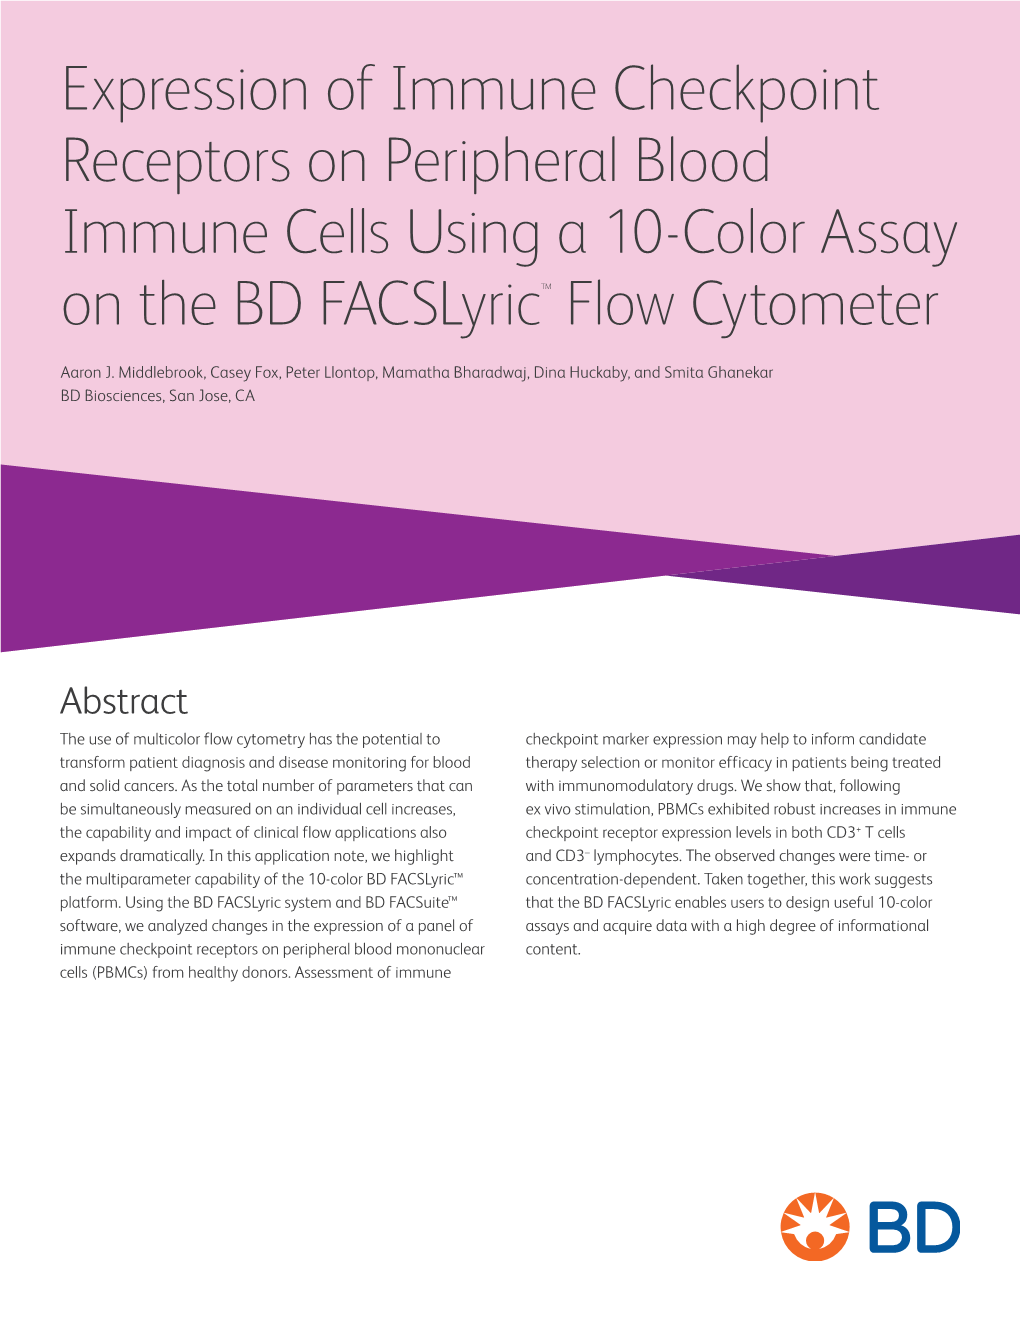 Expression of Immune Checkpoint Receptors on Peripheral Blood Immune Cells Using a 10-Color Assay on the BD Facslyric™ Flow Cytometer